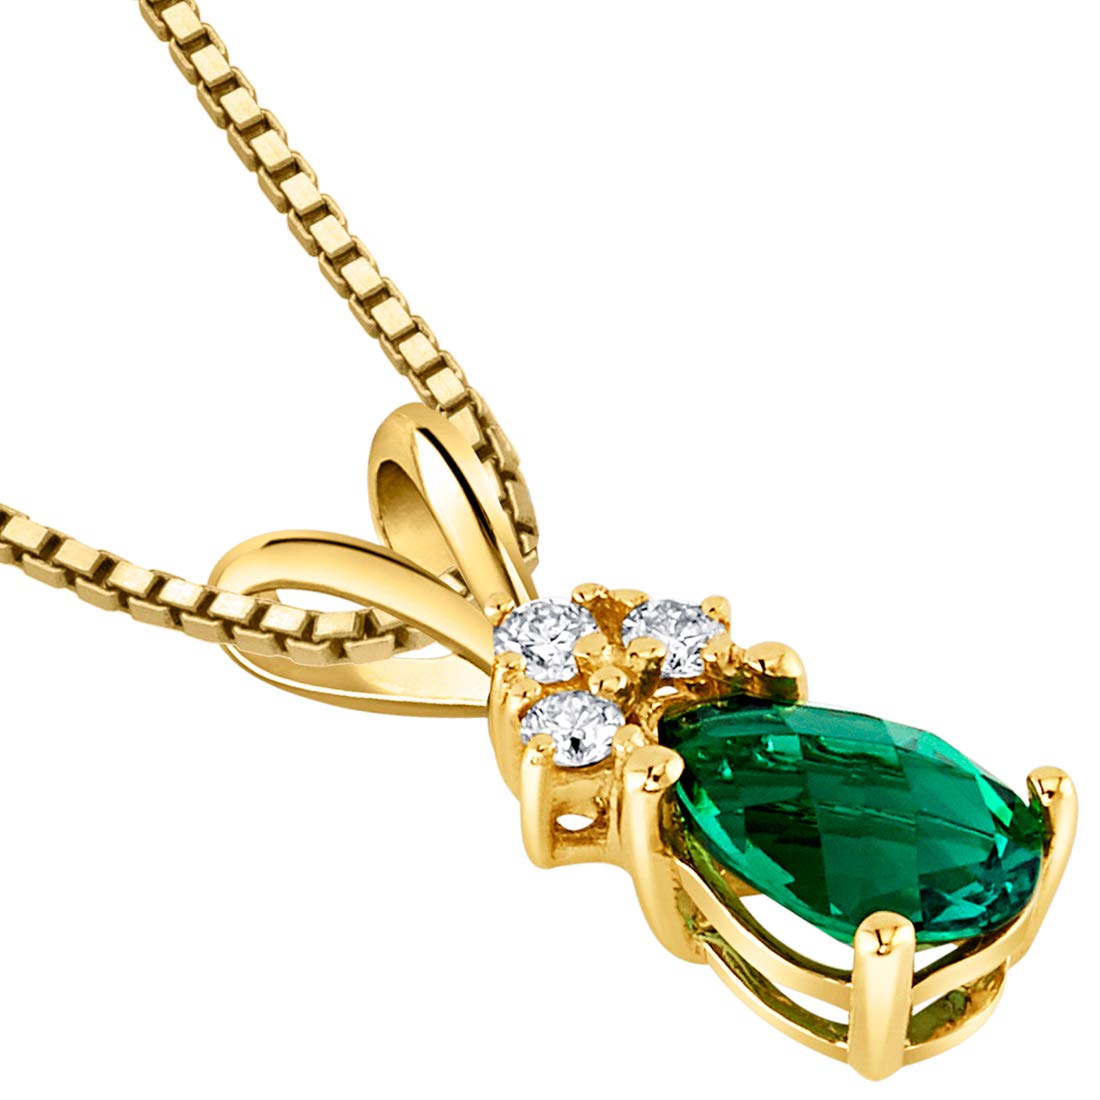 Peora Solid 14K Yellow Gold Created Emerald with Genuine Diamonds Pendant for Women, Dainty Teardrop Solitaire, Pear Shape, 7x5mm